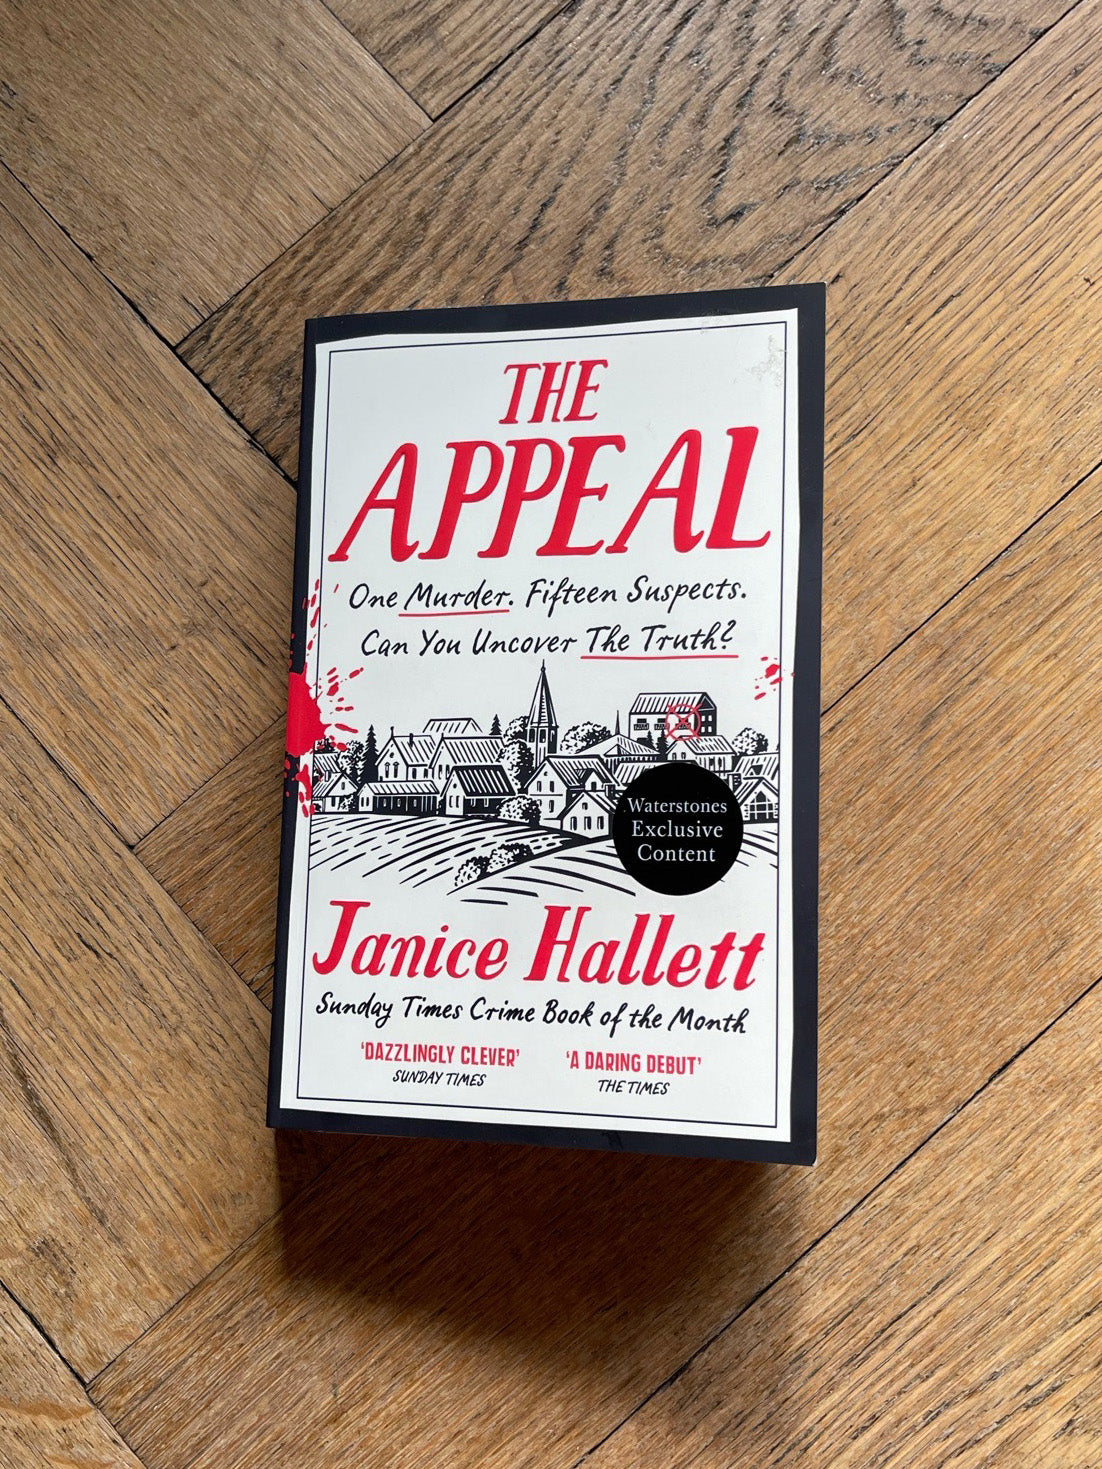 The Appeal by Janice Hallett